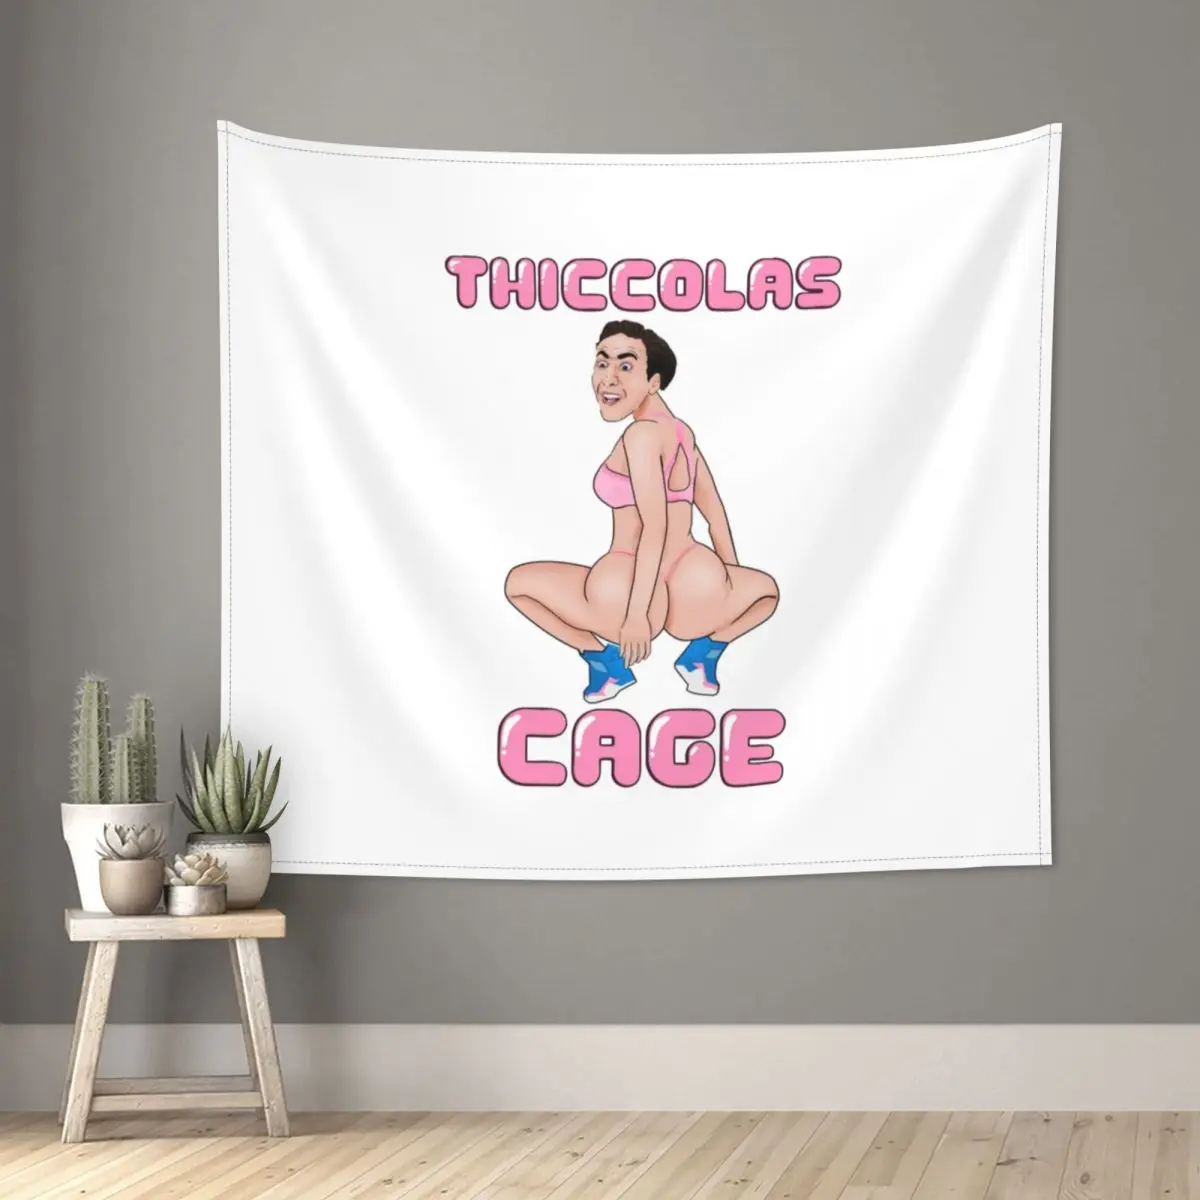 Thiccolas Cage Nicolas Cage Meme Tapestry Hippie Fabric Wall Hanging Wall Decor Yoga Mat Art Blanket